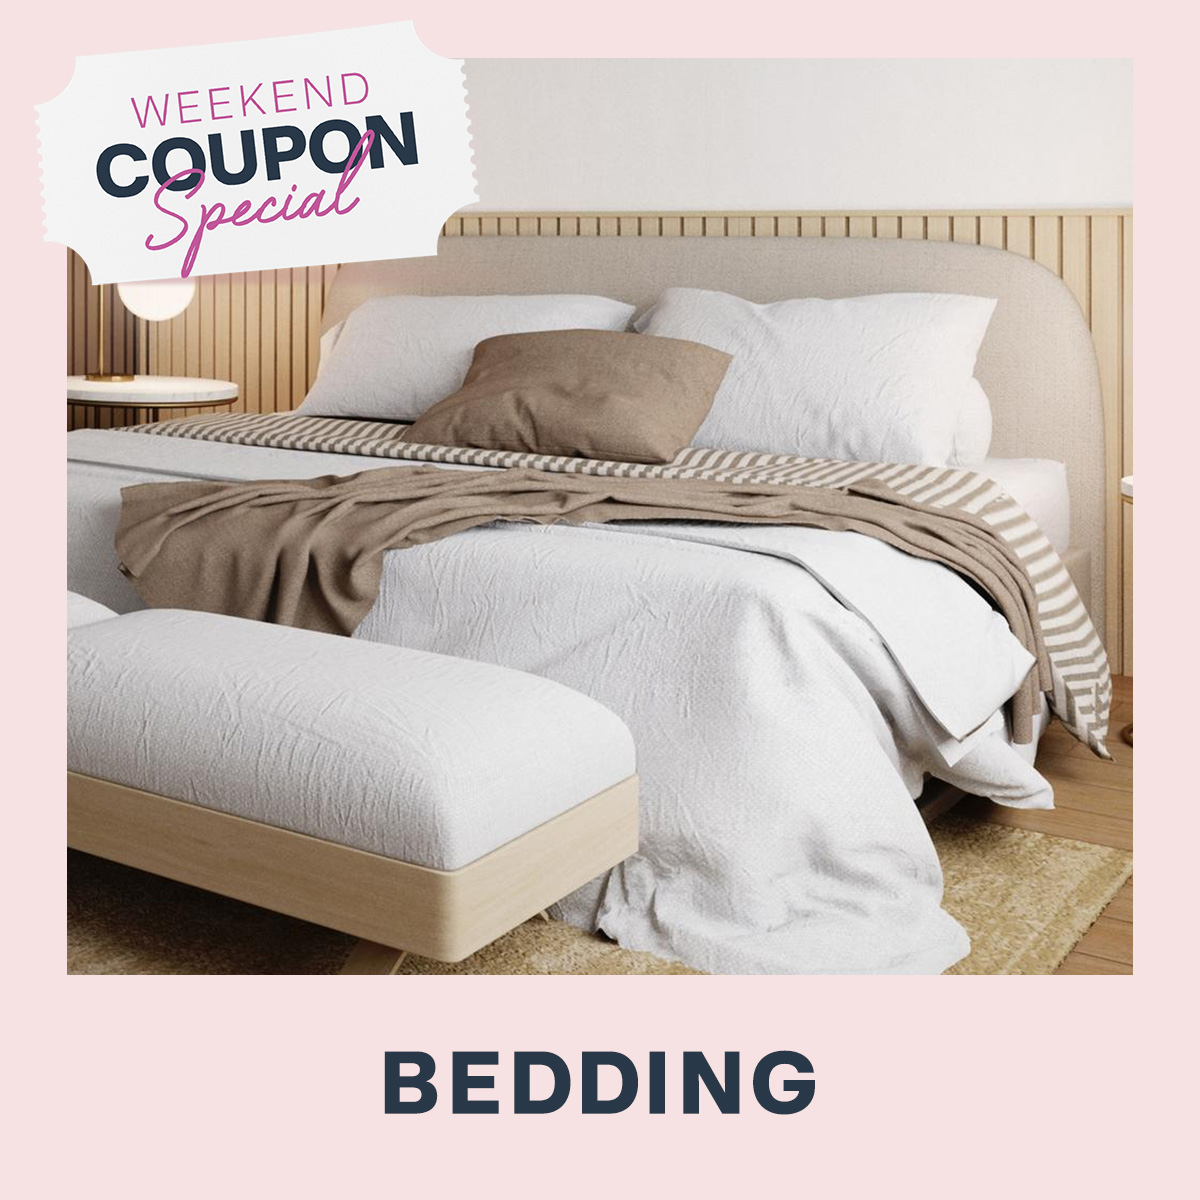 Weekend Bedding Coupon Special